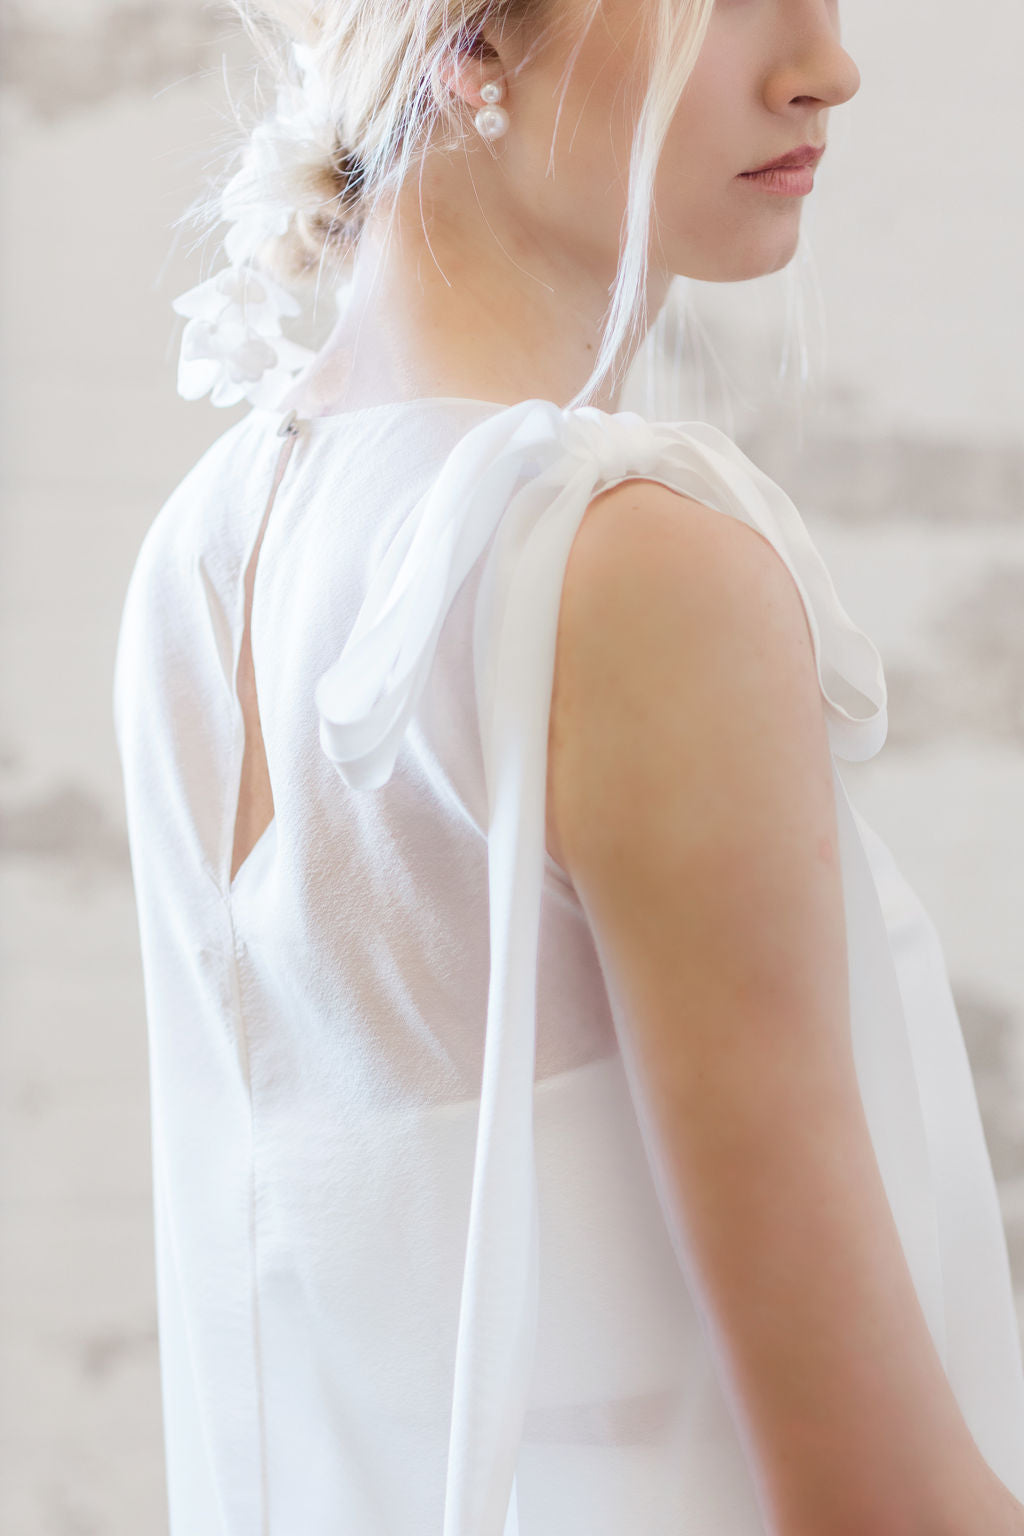 Bridal tunic and skirt. Sheer minimalist bridal separates. Designed and hand made in Canada.